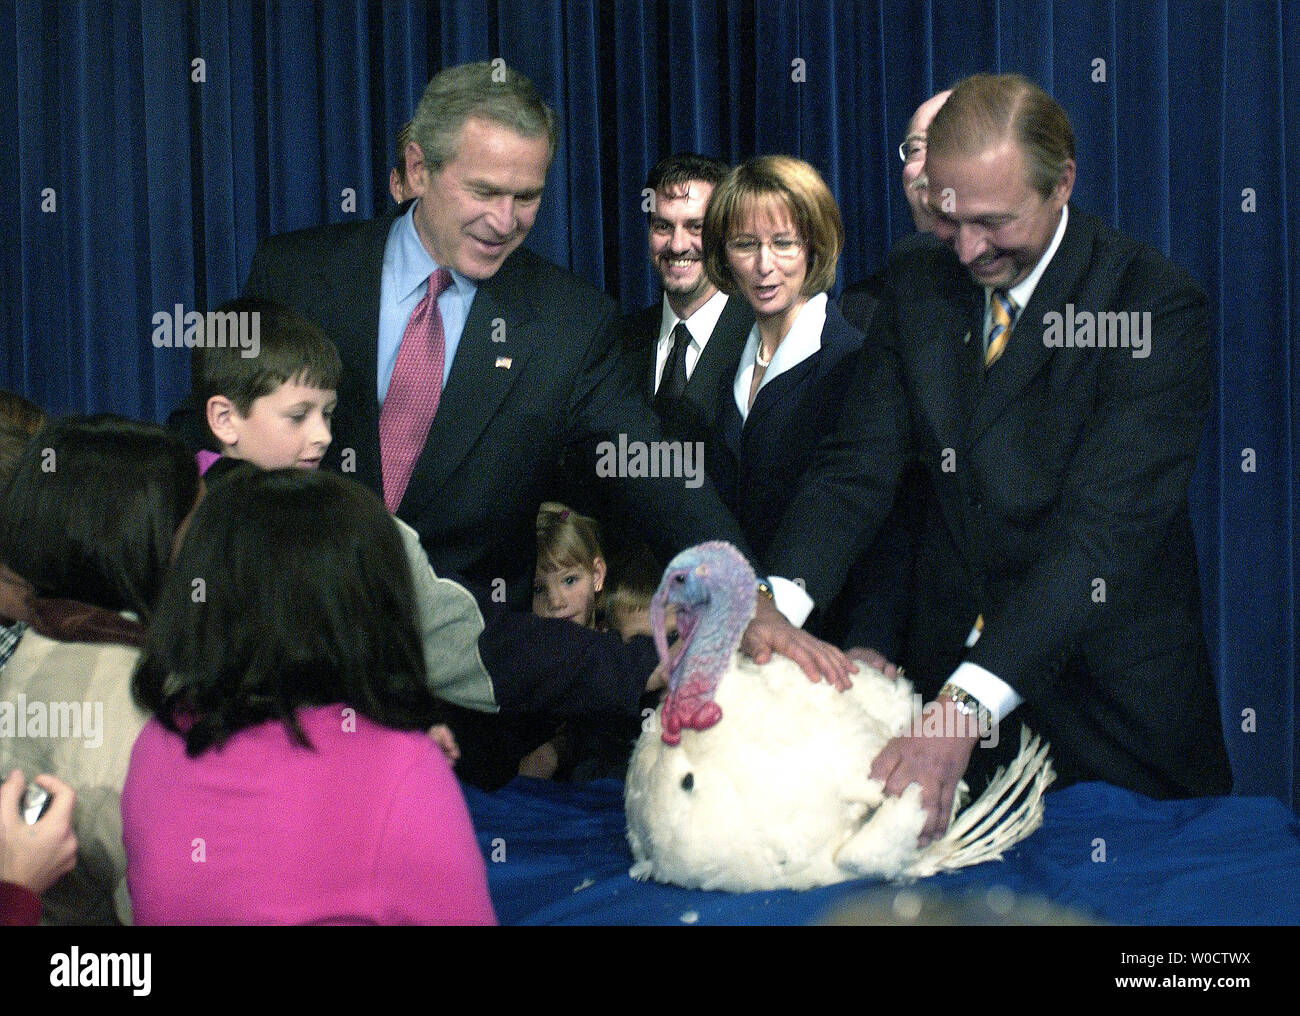 President George W. Bush (L), turkey raiser James Trites (R) and principles and students from various local elementary schools pet the recently pardoned turkey, Marshmallow, during the 58th annual Turkey Ceremony, at the Old Executive Office Building in Washington on November 22, 2005. The Turkey will fly first class to Disneyland where he will serve at the grand marshal of the Disneyland's Thanksgiving Day Parade, and spend the rest of his life at a nature preserve at the park. (UPI Photo/Kevin Dietsch) Stock Photo